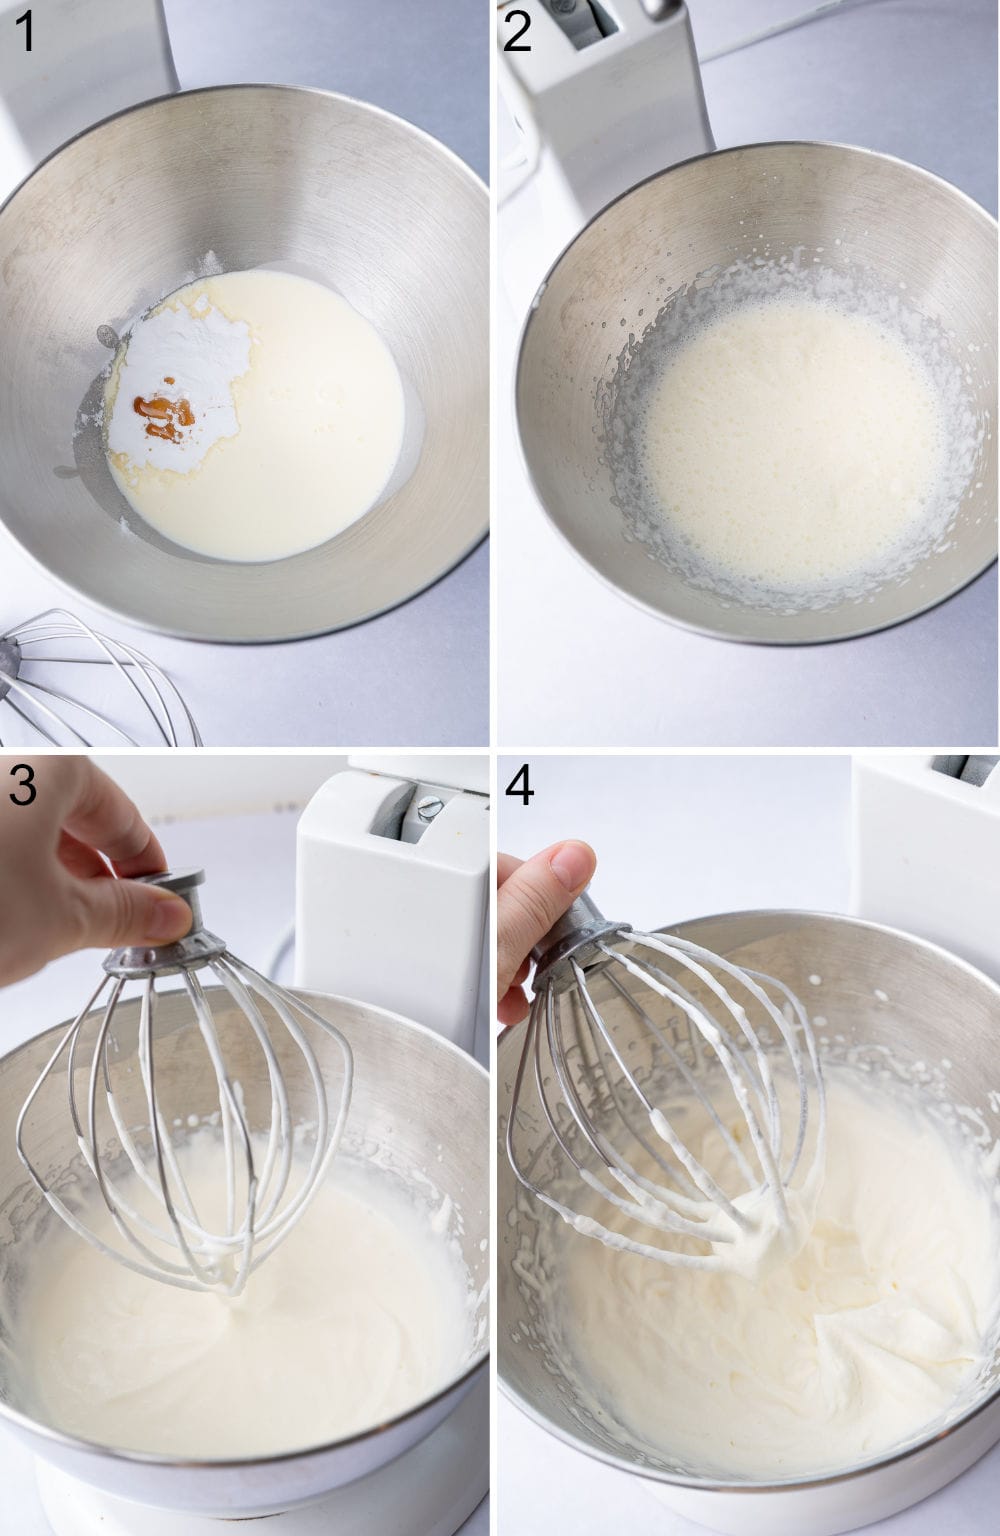 A collage of 4 photos showing how to make homemade whipped cream step by step.